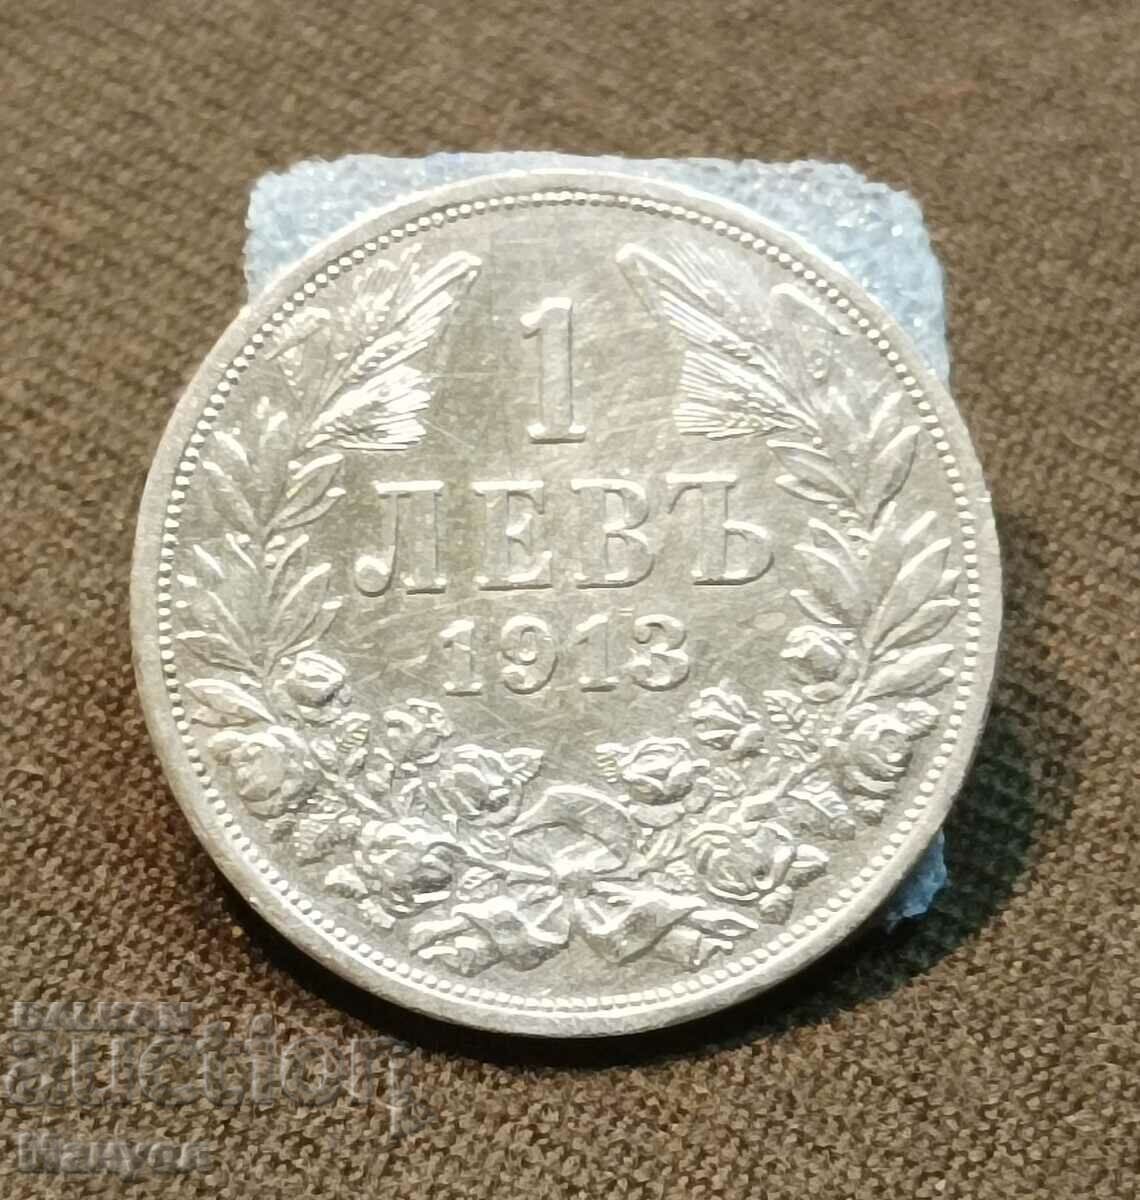 I am selling a very nice 1 BGN 1913 coin.